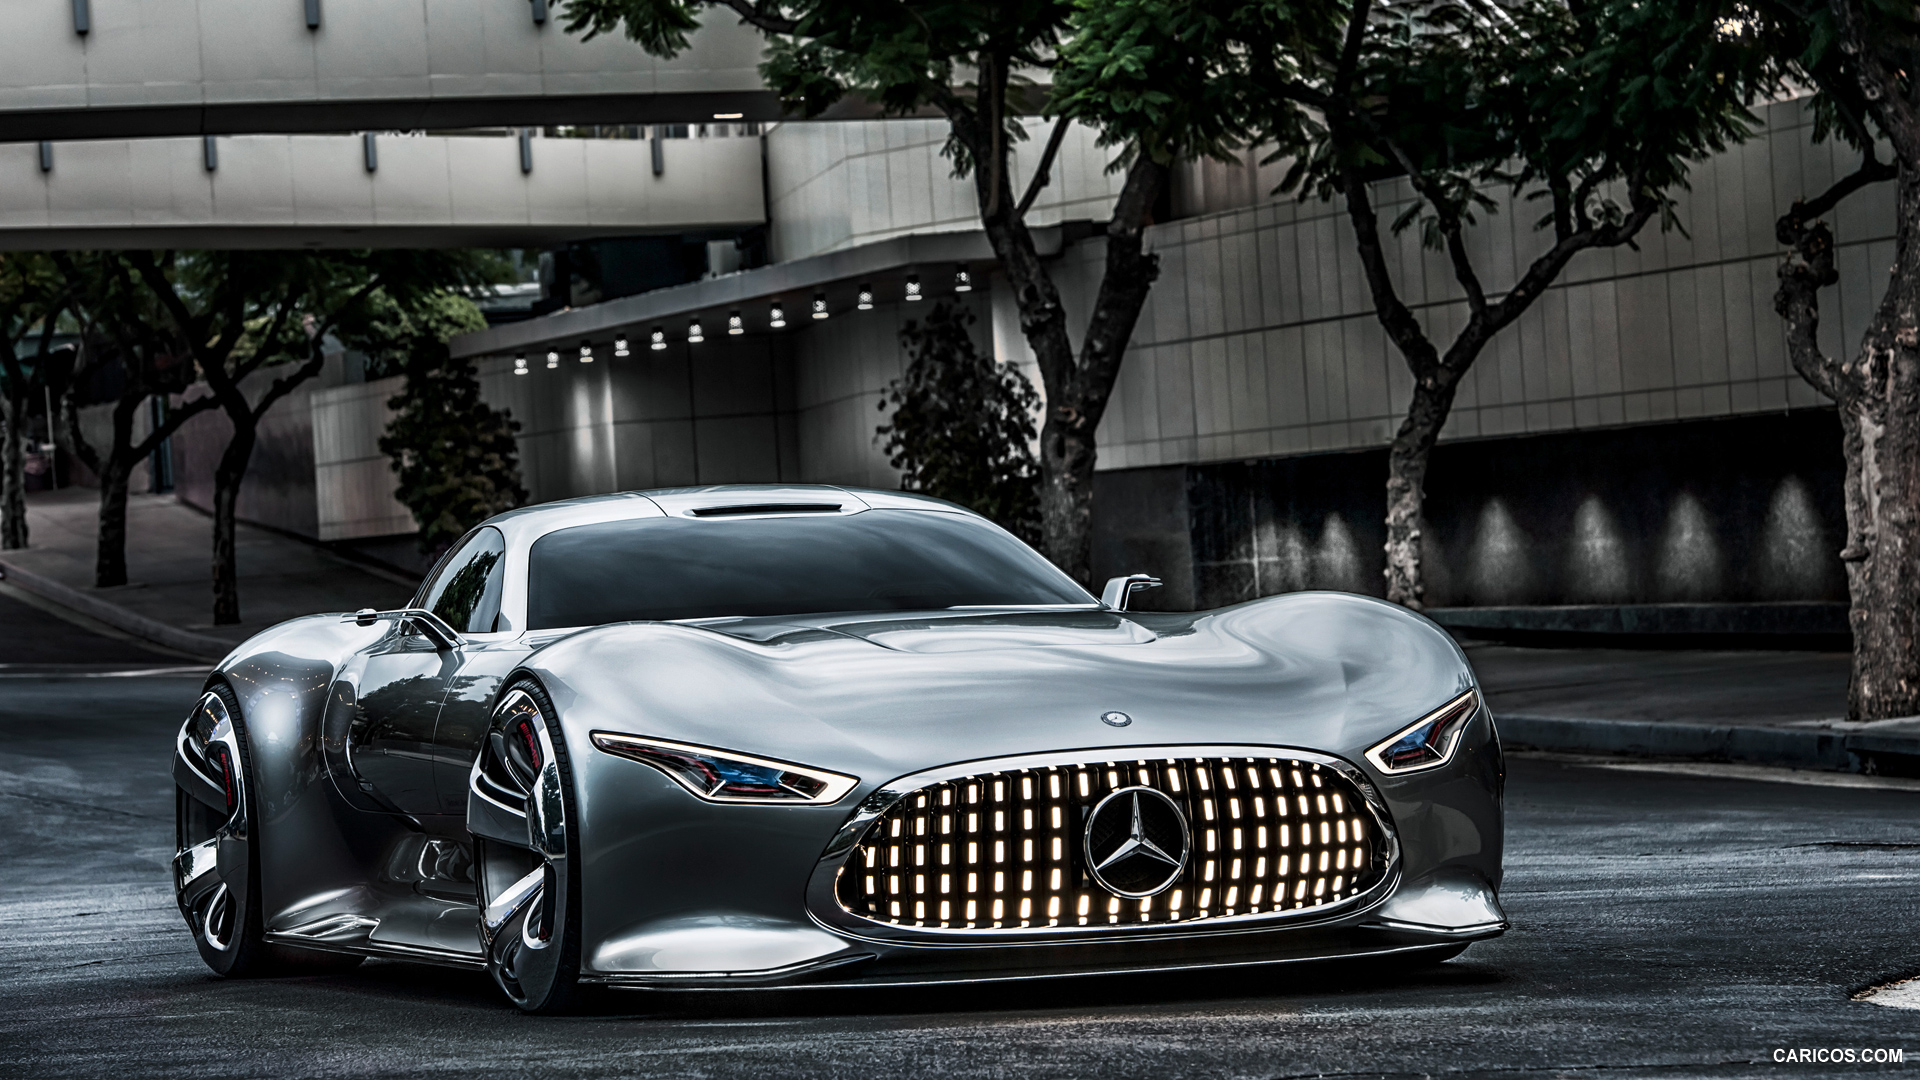 Mercedes-Benz AMG Vision Gran Turismo Concept (2013)  - Front, #1 of 25